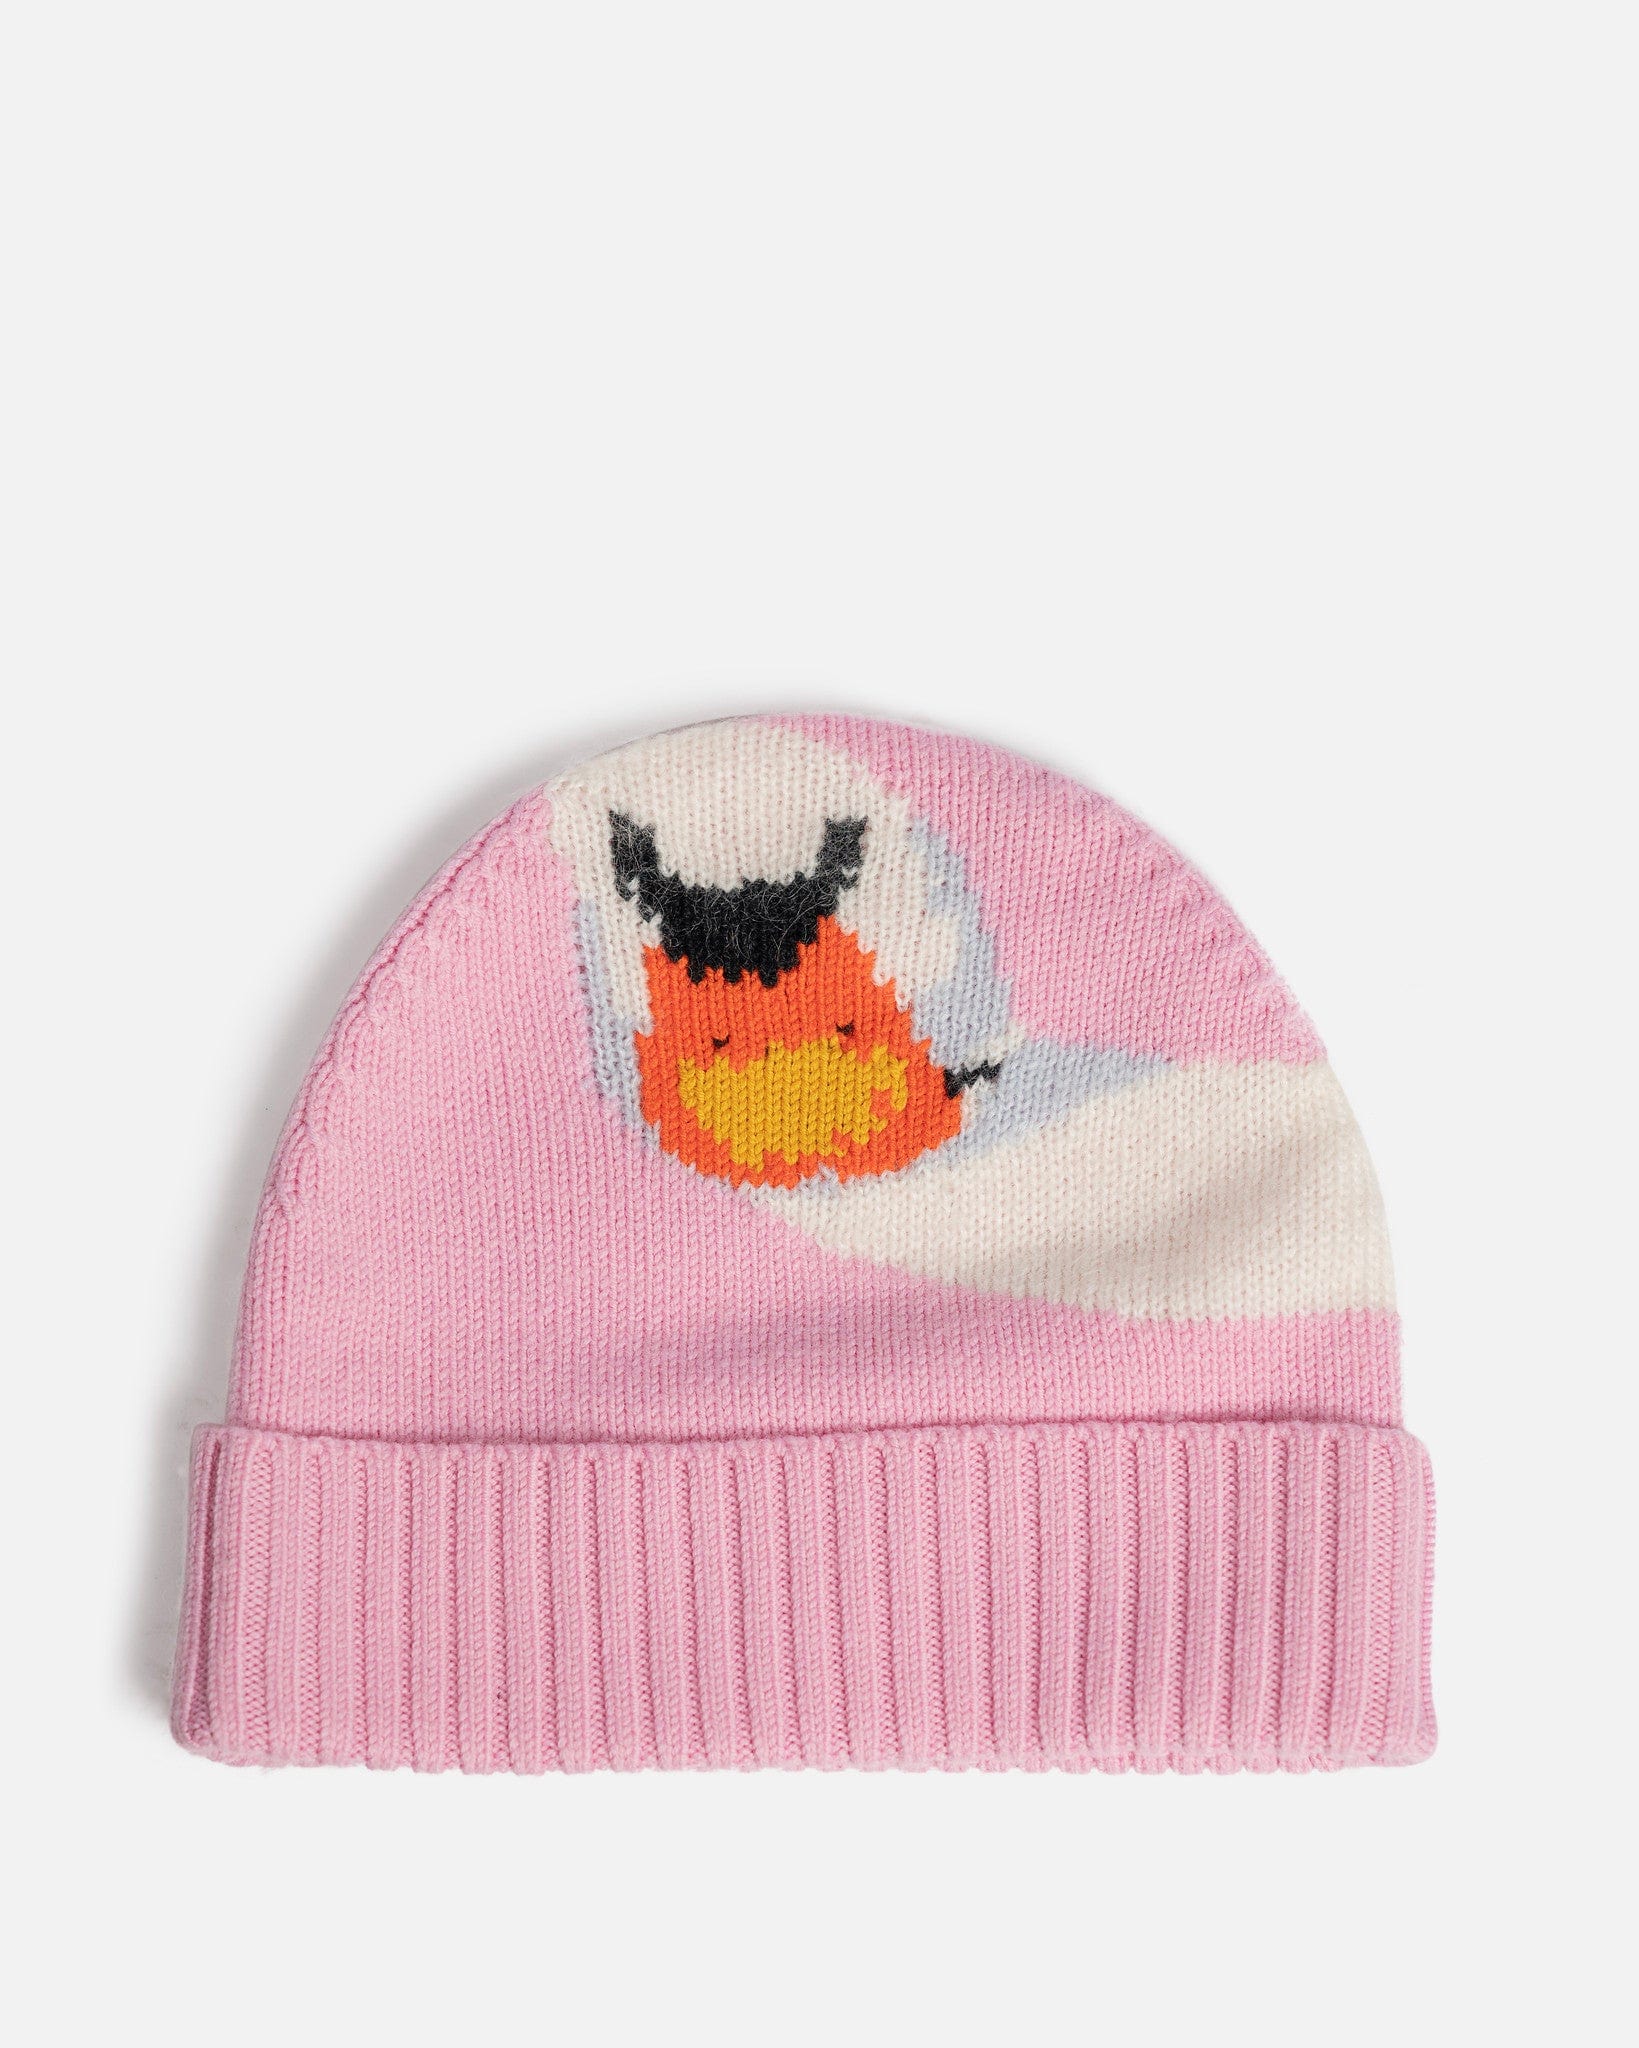 JW Anderson Men's Hats O/S Intarsia Knit Swan Beanie in Light Pink